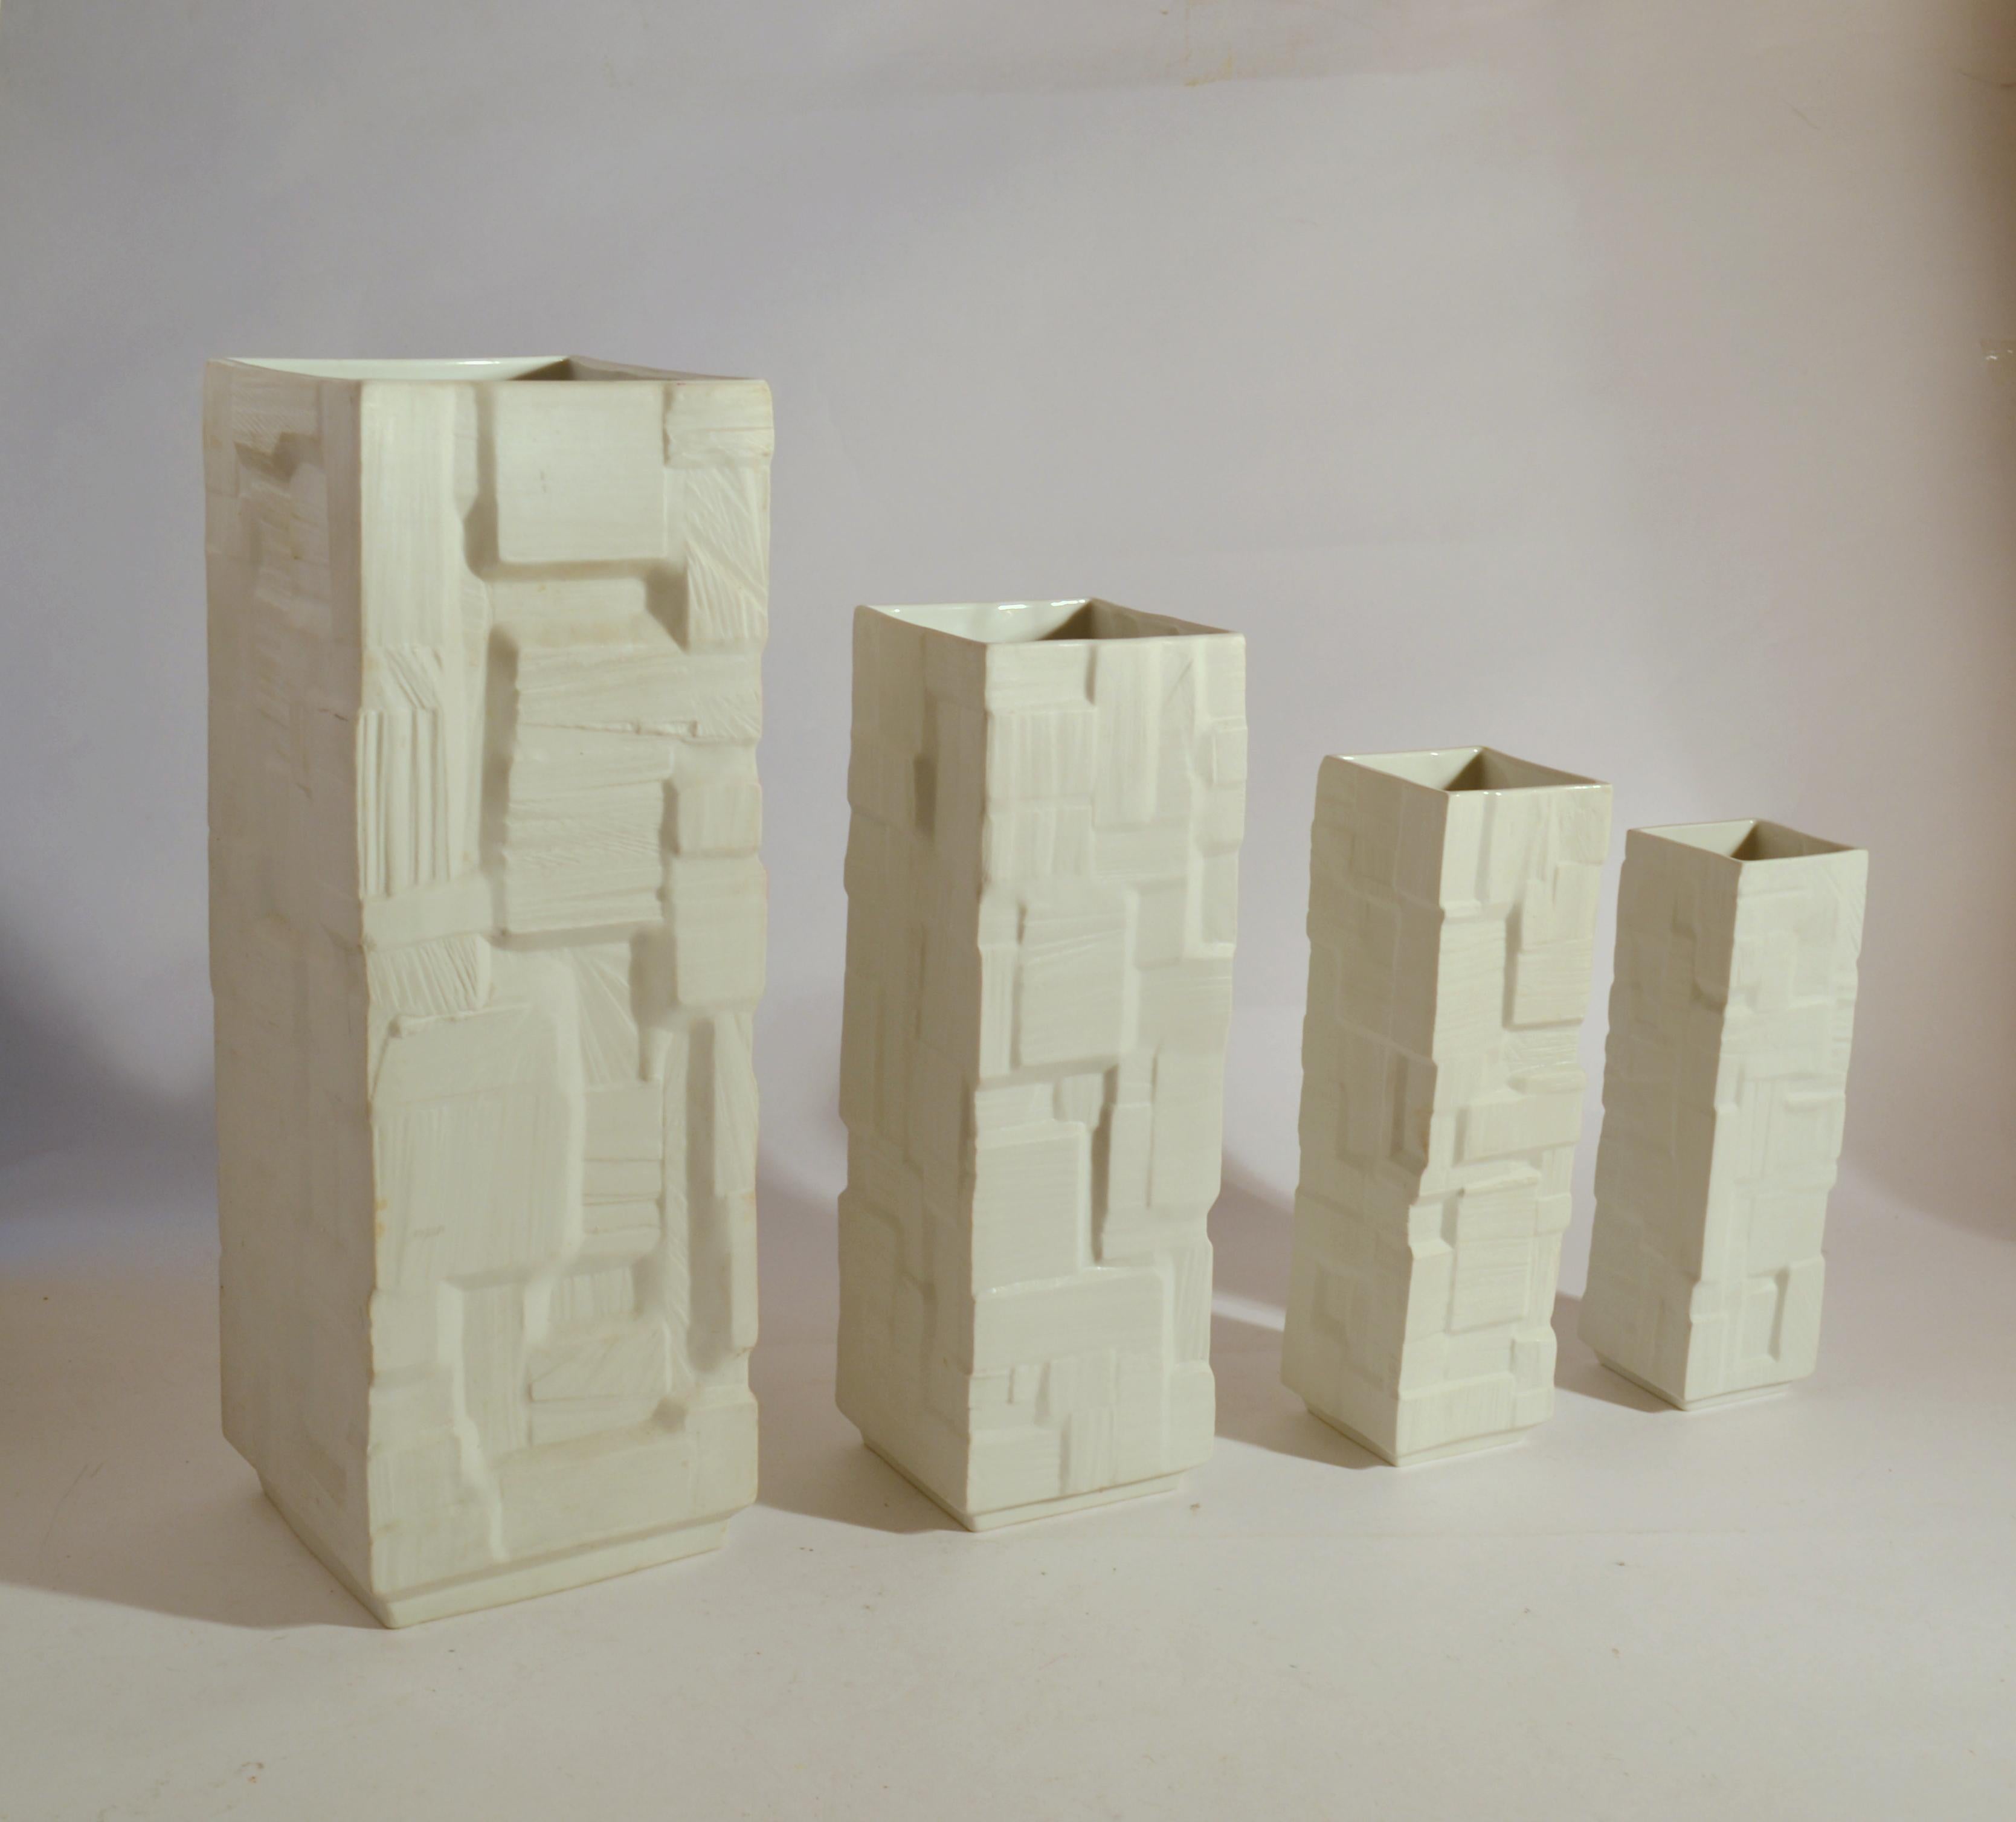 Set of four white porcelain square vases in descending heights with relief surface, Germany, 1960's.
Measures: Heights 40-32-26-22.5 cm
Width 14-10-7.5-6.4 cm.